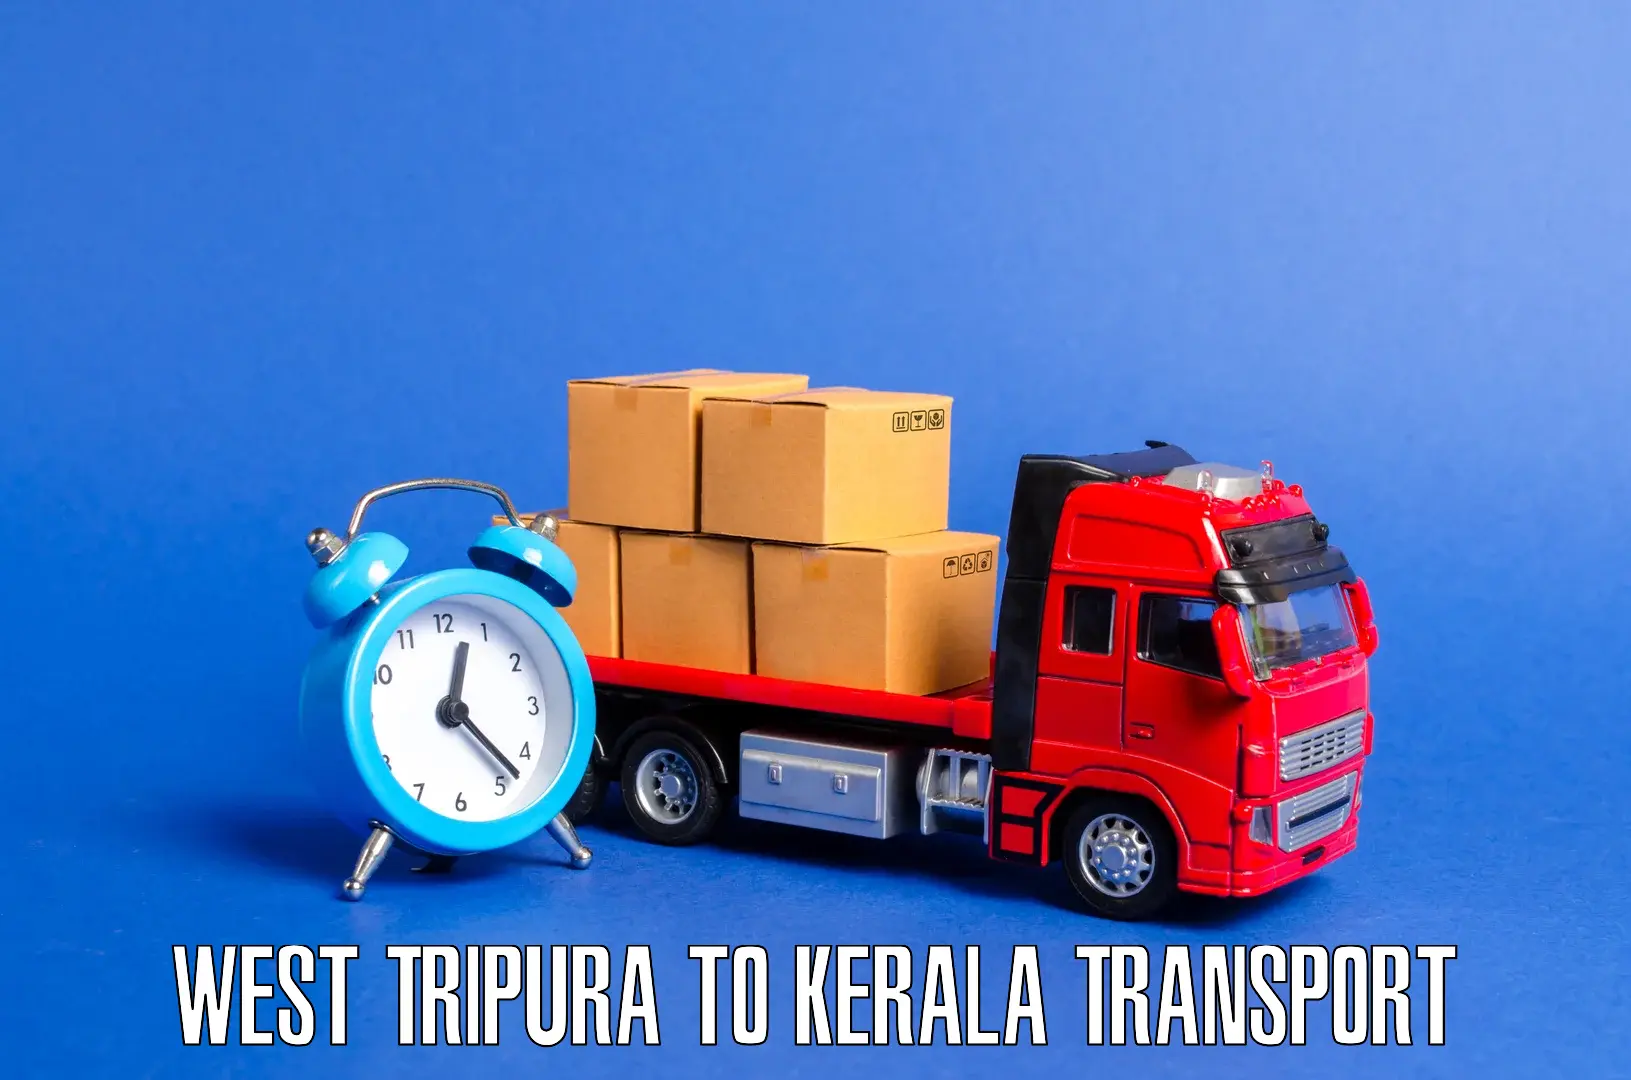 Container transport service West Tripura to Calicut